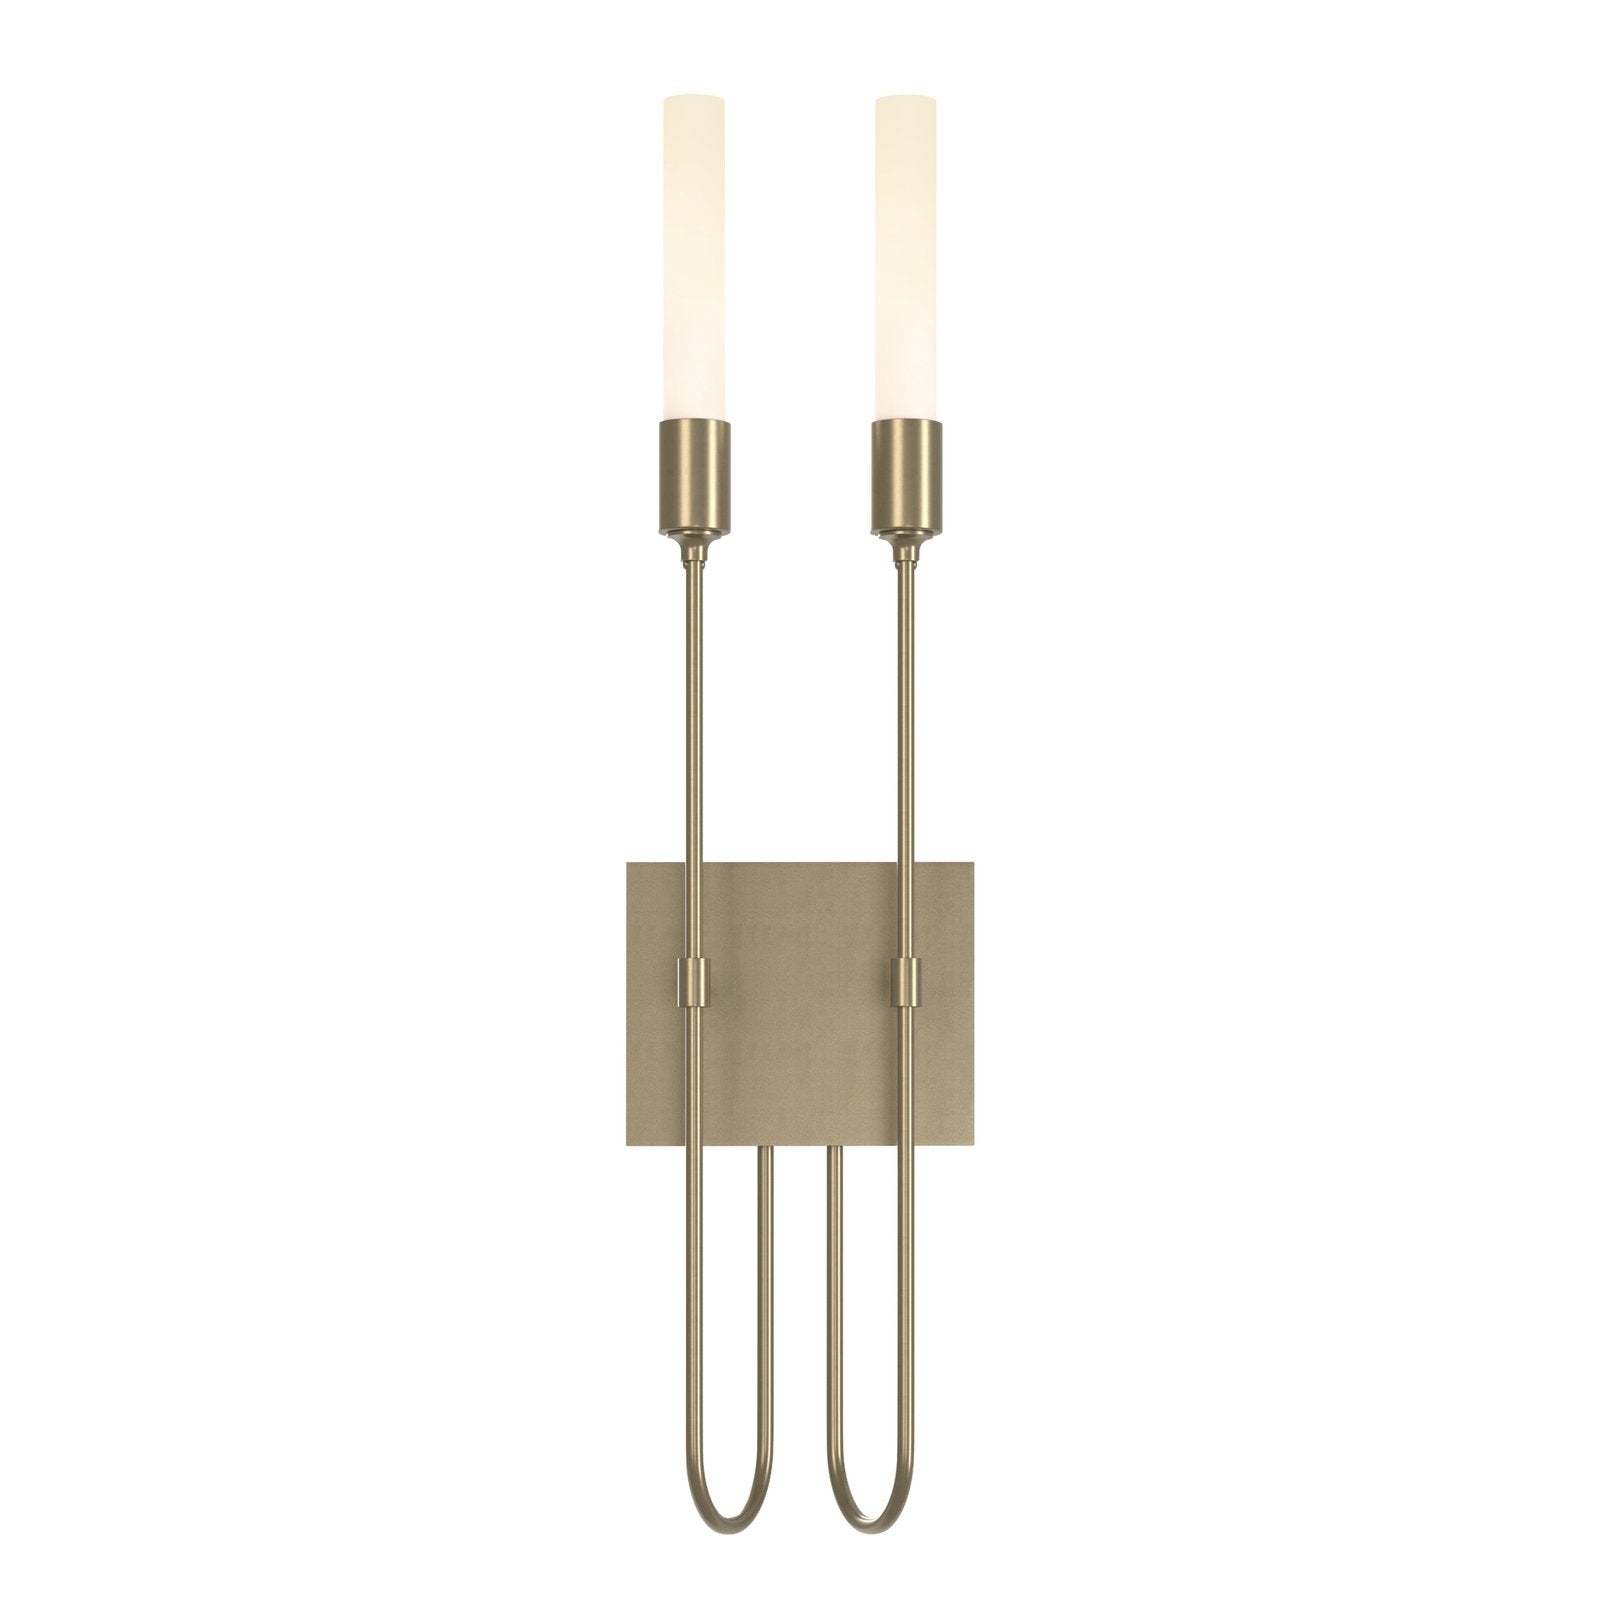 Lisse Light Sconce Wall Light Fixtures Hubbardton Forge Soft Gold 5.5x22.2 